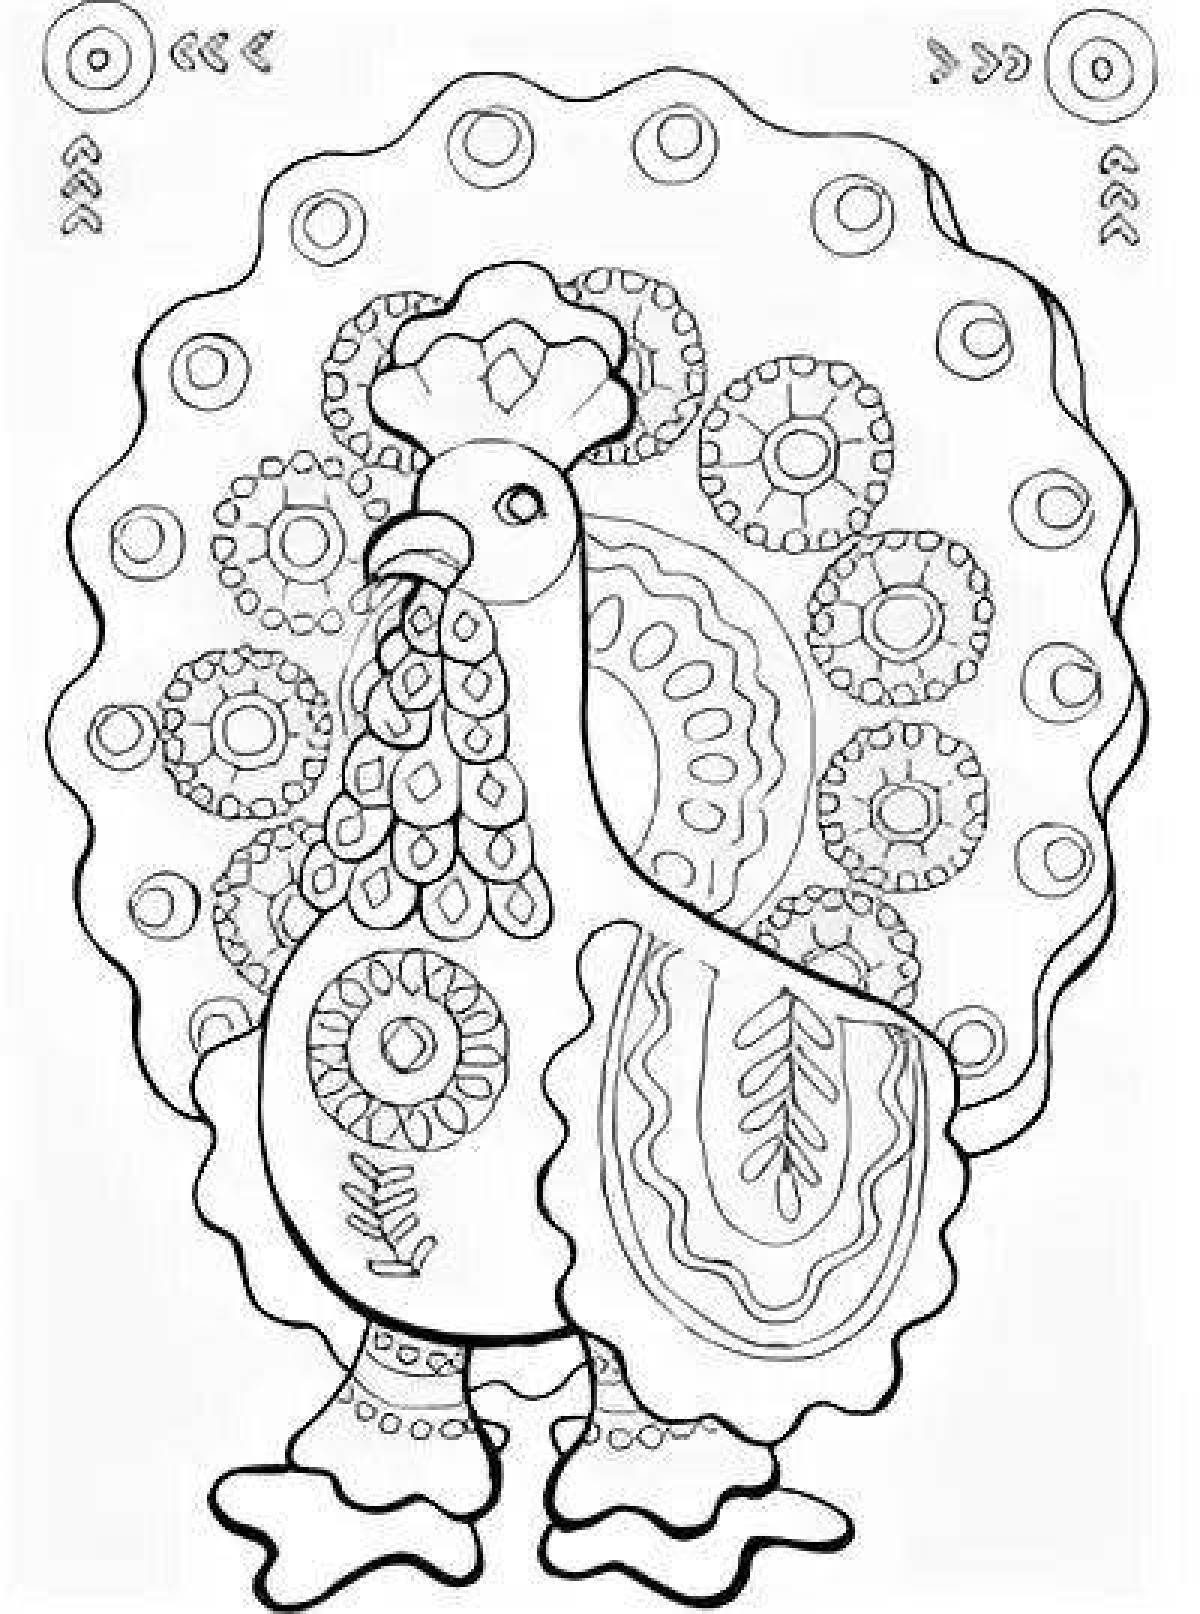 Coloring book shiny Dymkovo rooster